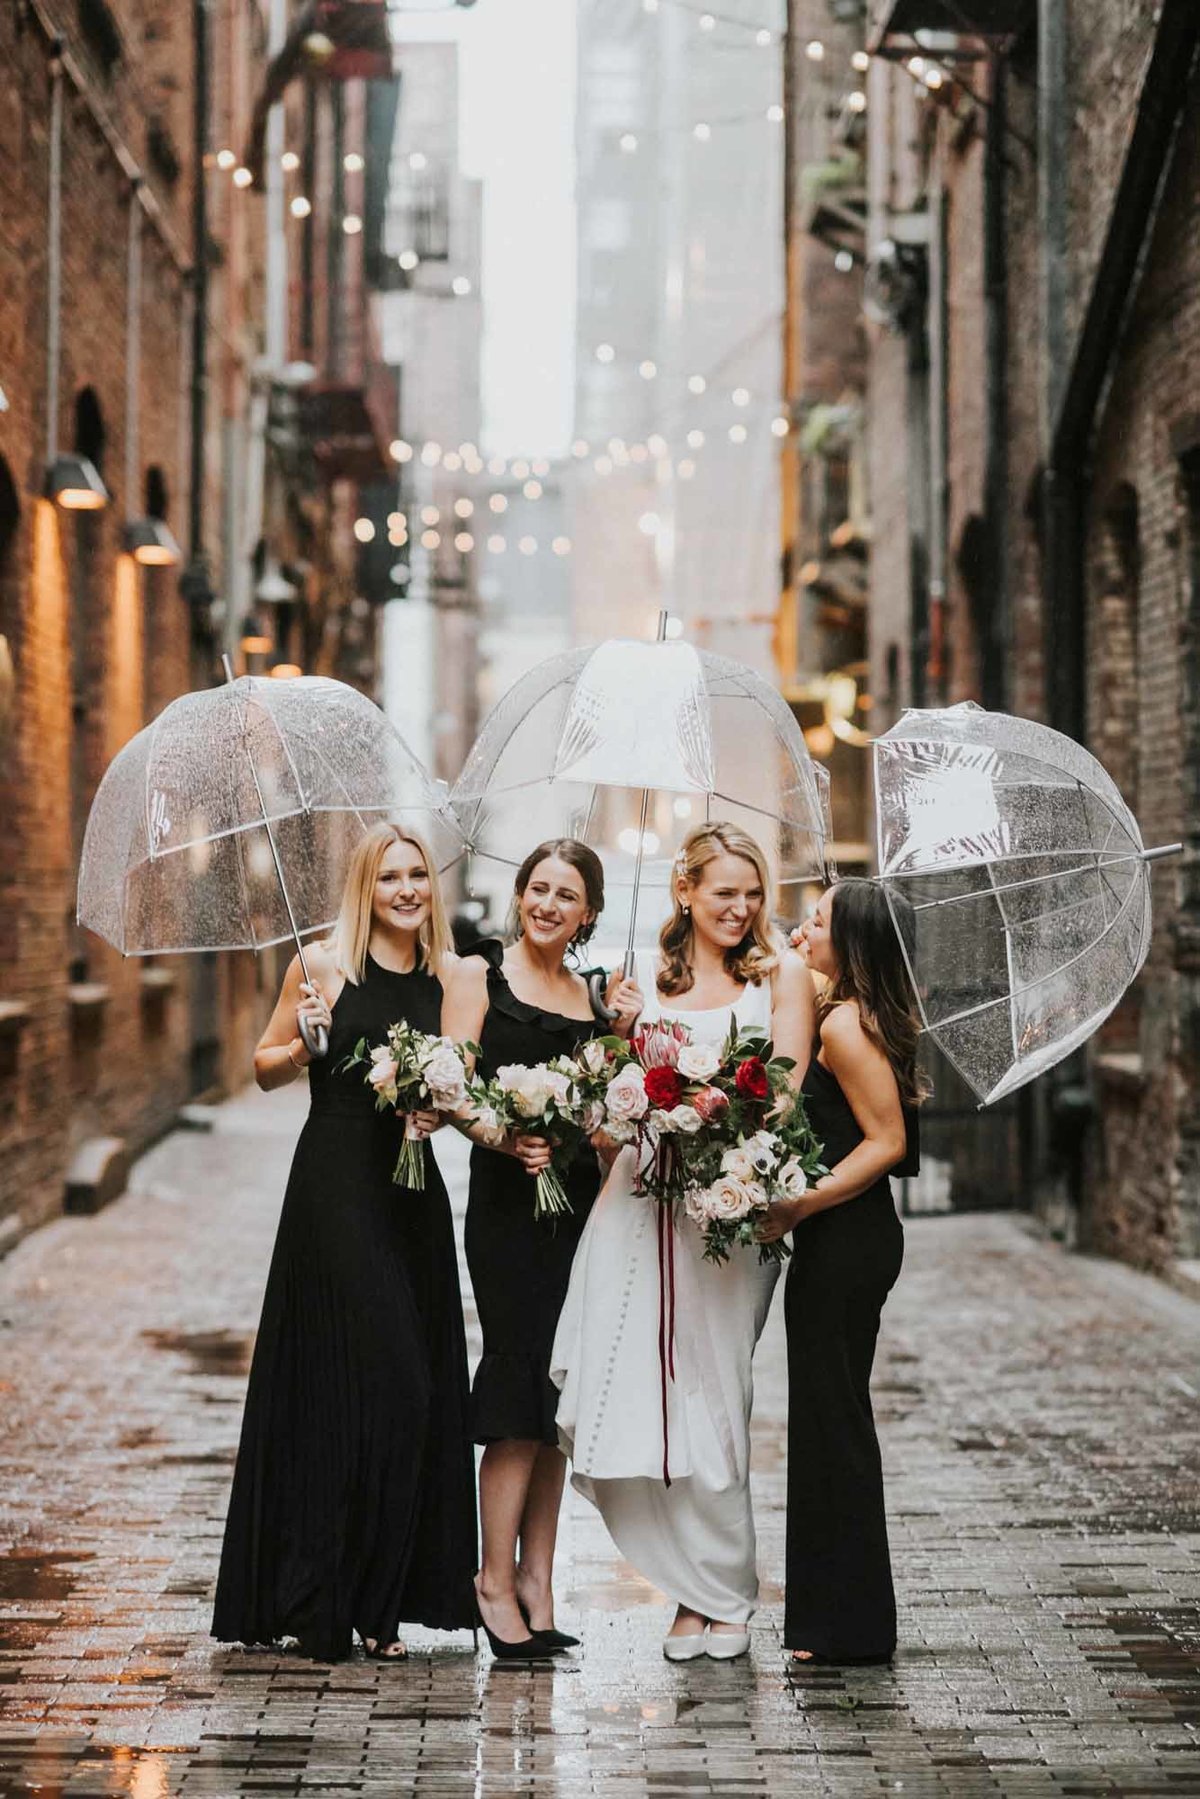 Bride and bride's maids in black dresses, in Seattle alley in the rain, with clear umbrellas